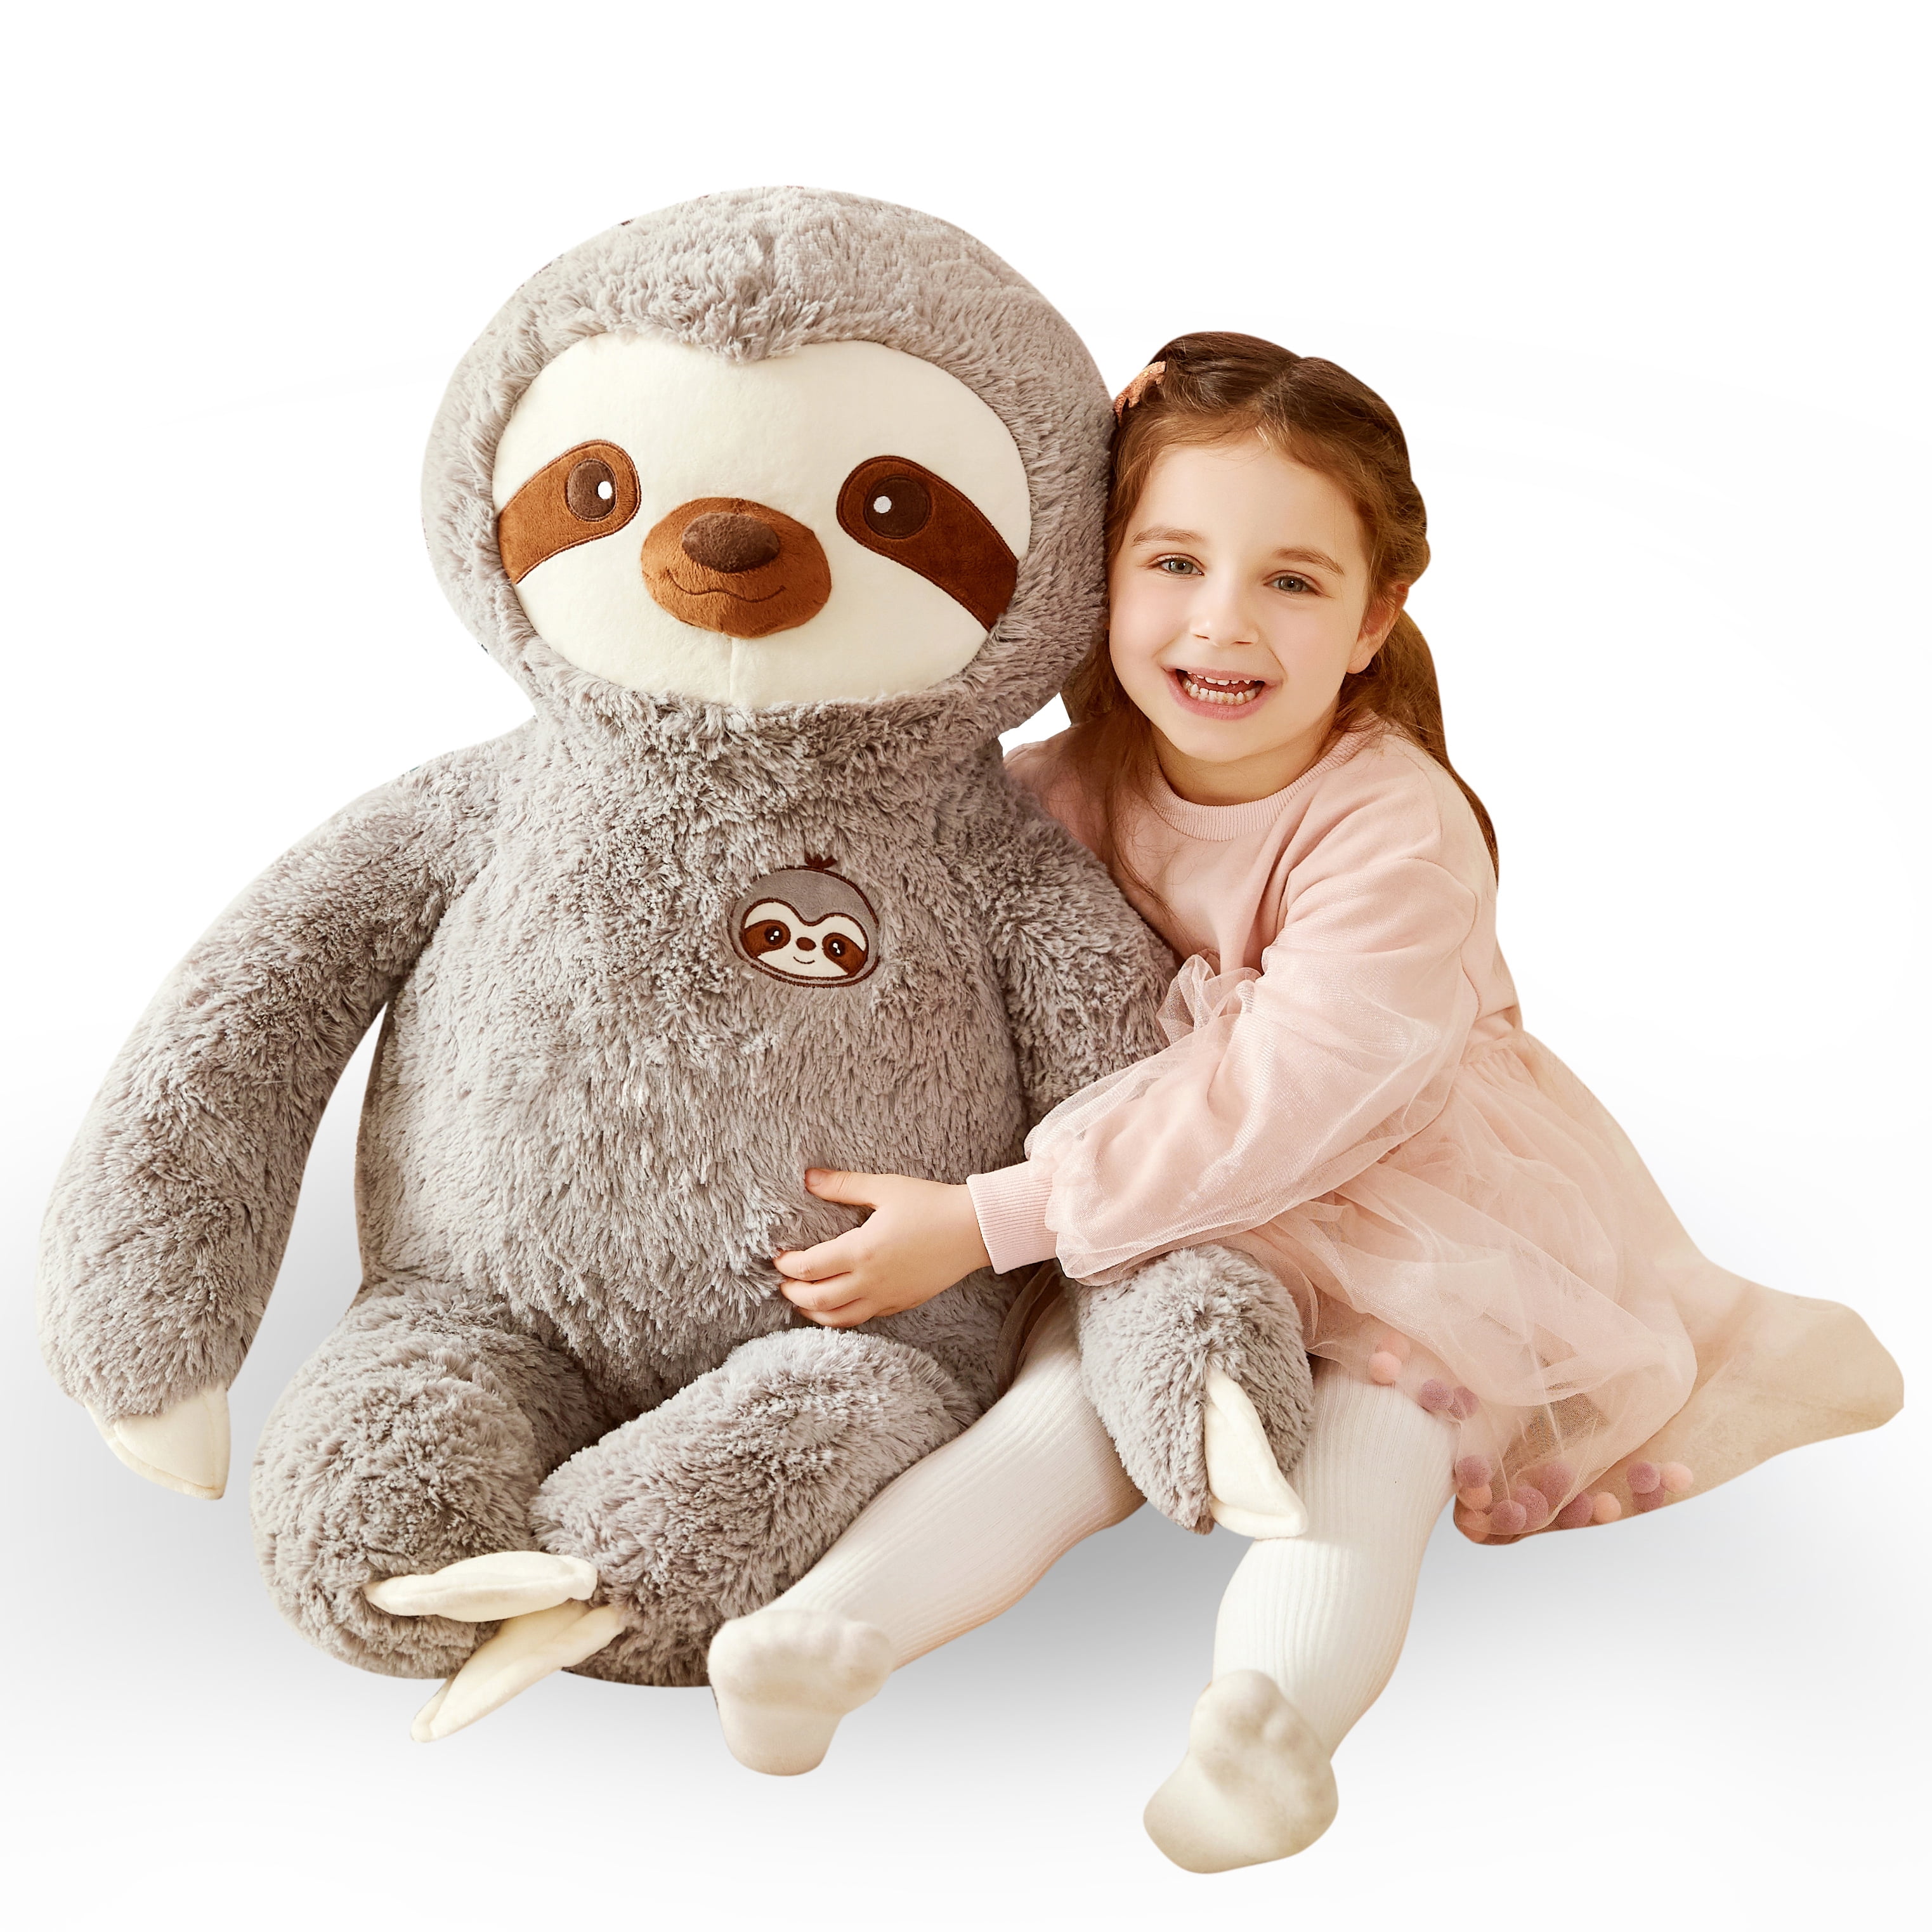 Girls and Adults Super Realistic Floppy Large Plush Toy for Boys Measures 13 inches / 33 cm KINREX Three Toed Sloth Stuffed Animal 